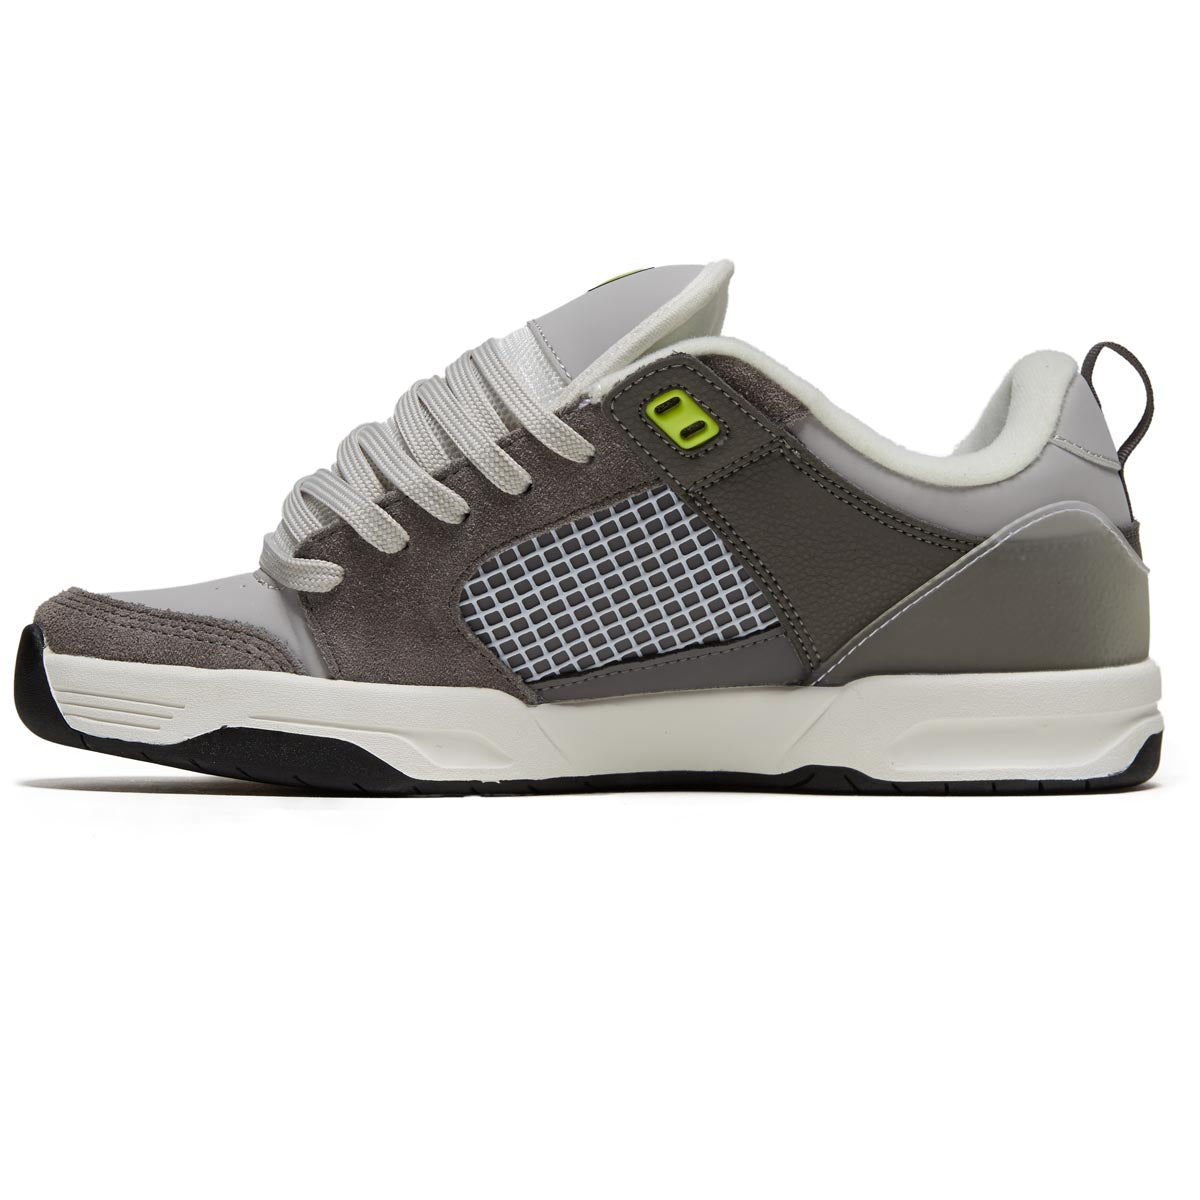 C1rca Tave TT Shoes - Grey/Black/Lime Green image 2